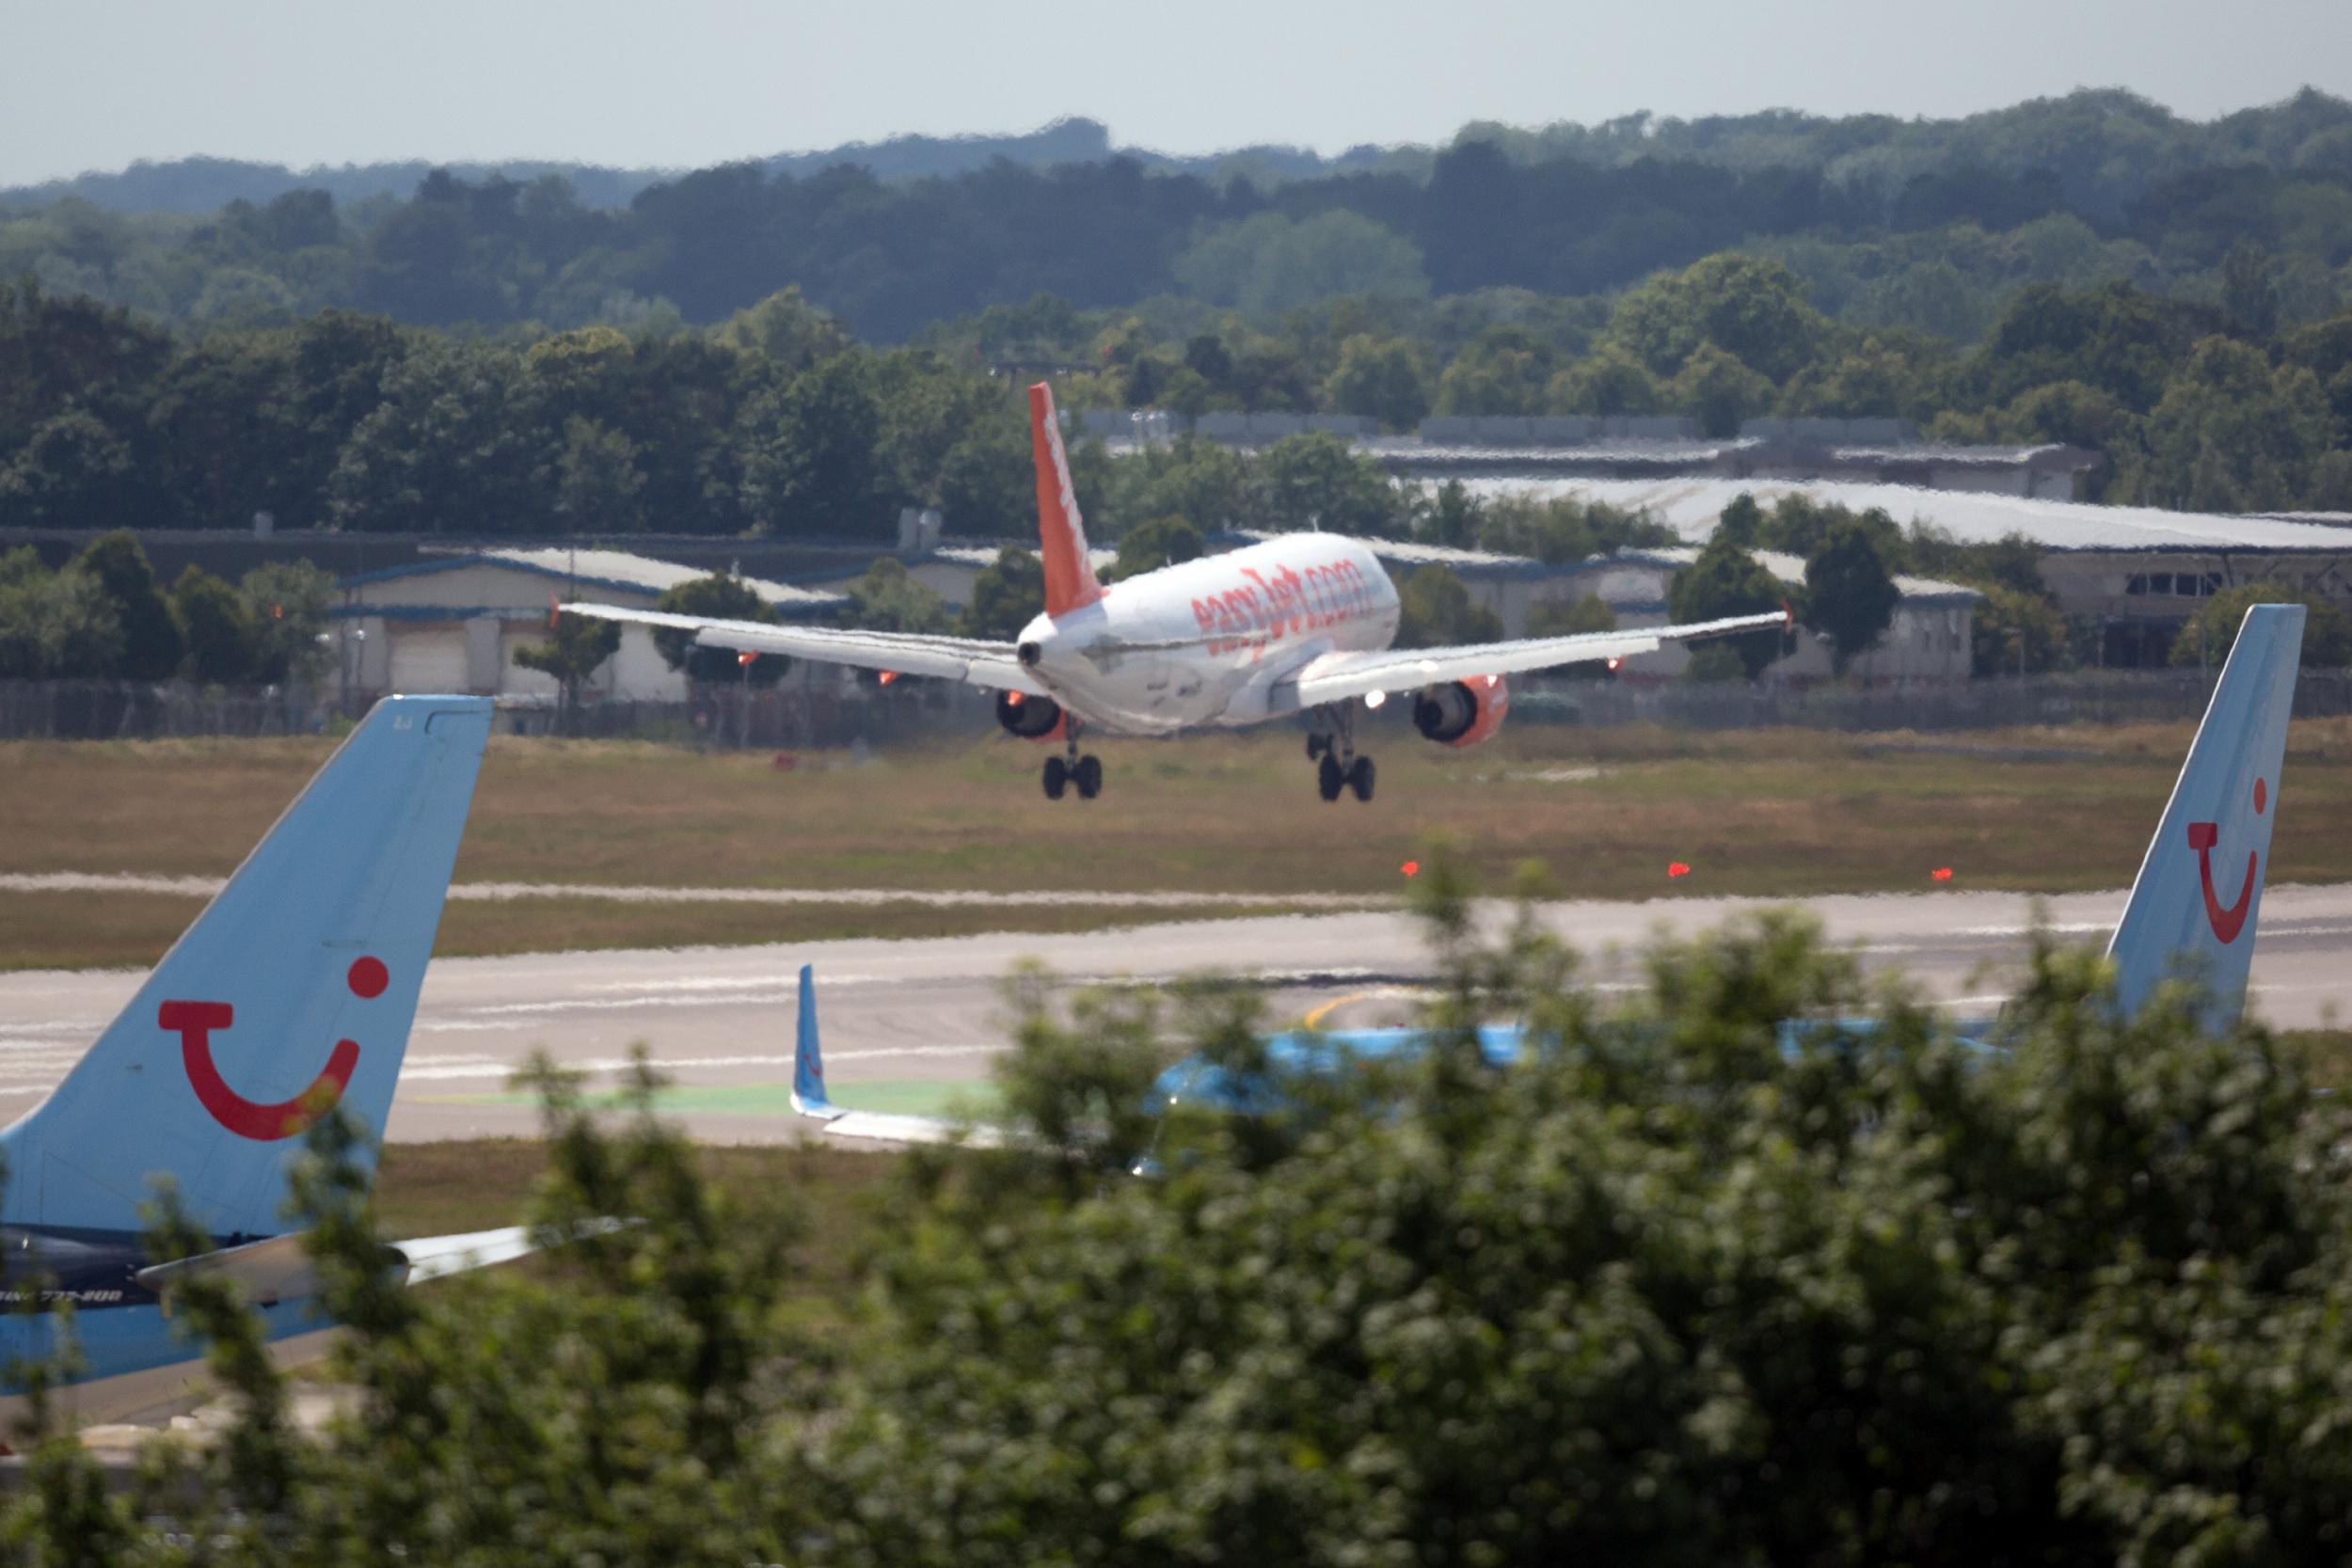 It won't be business as usual at Gatwick's North and South terminals from 24 January